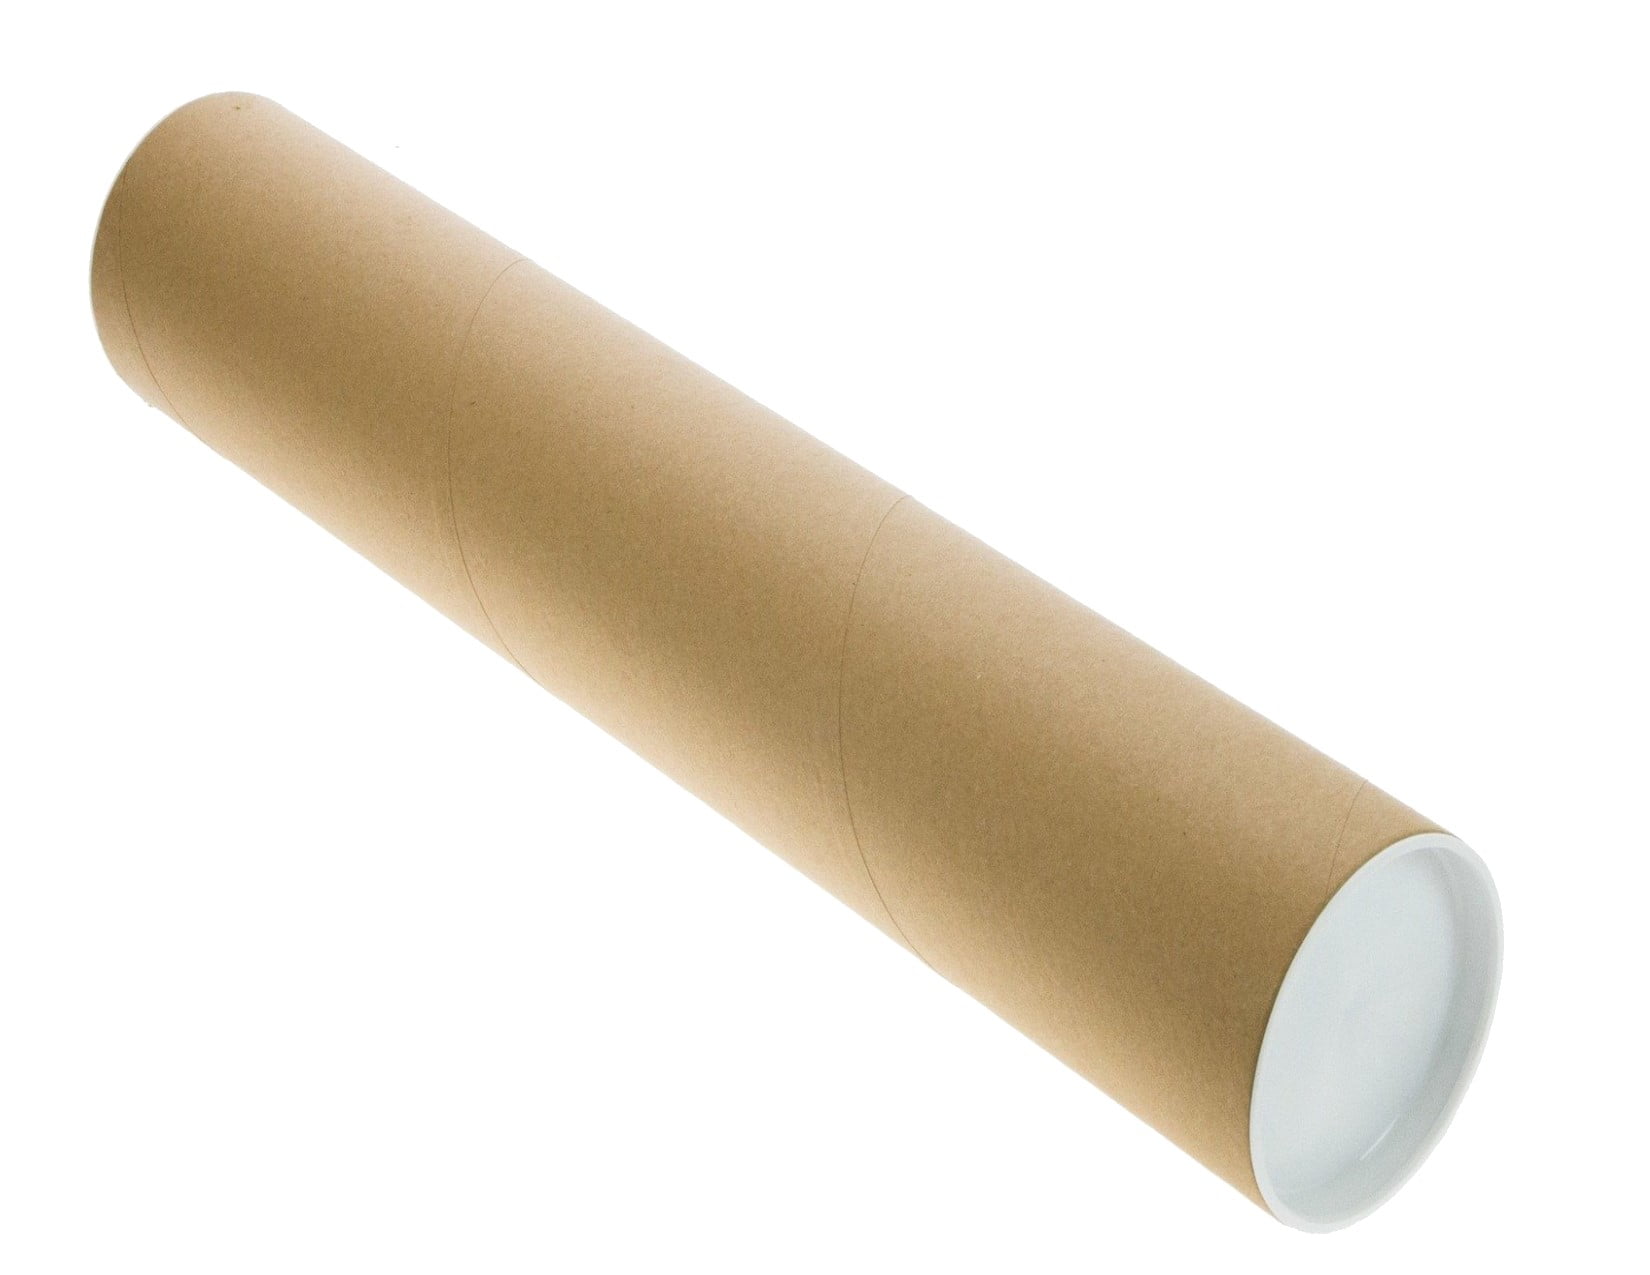 Details about   BOX USA BP1524K Mailing Tubes with Caps 1-1/2" x 24" Kraft Pack of 50 